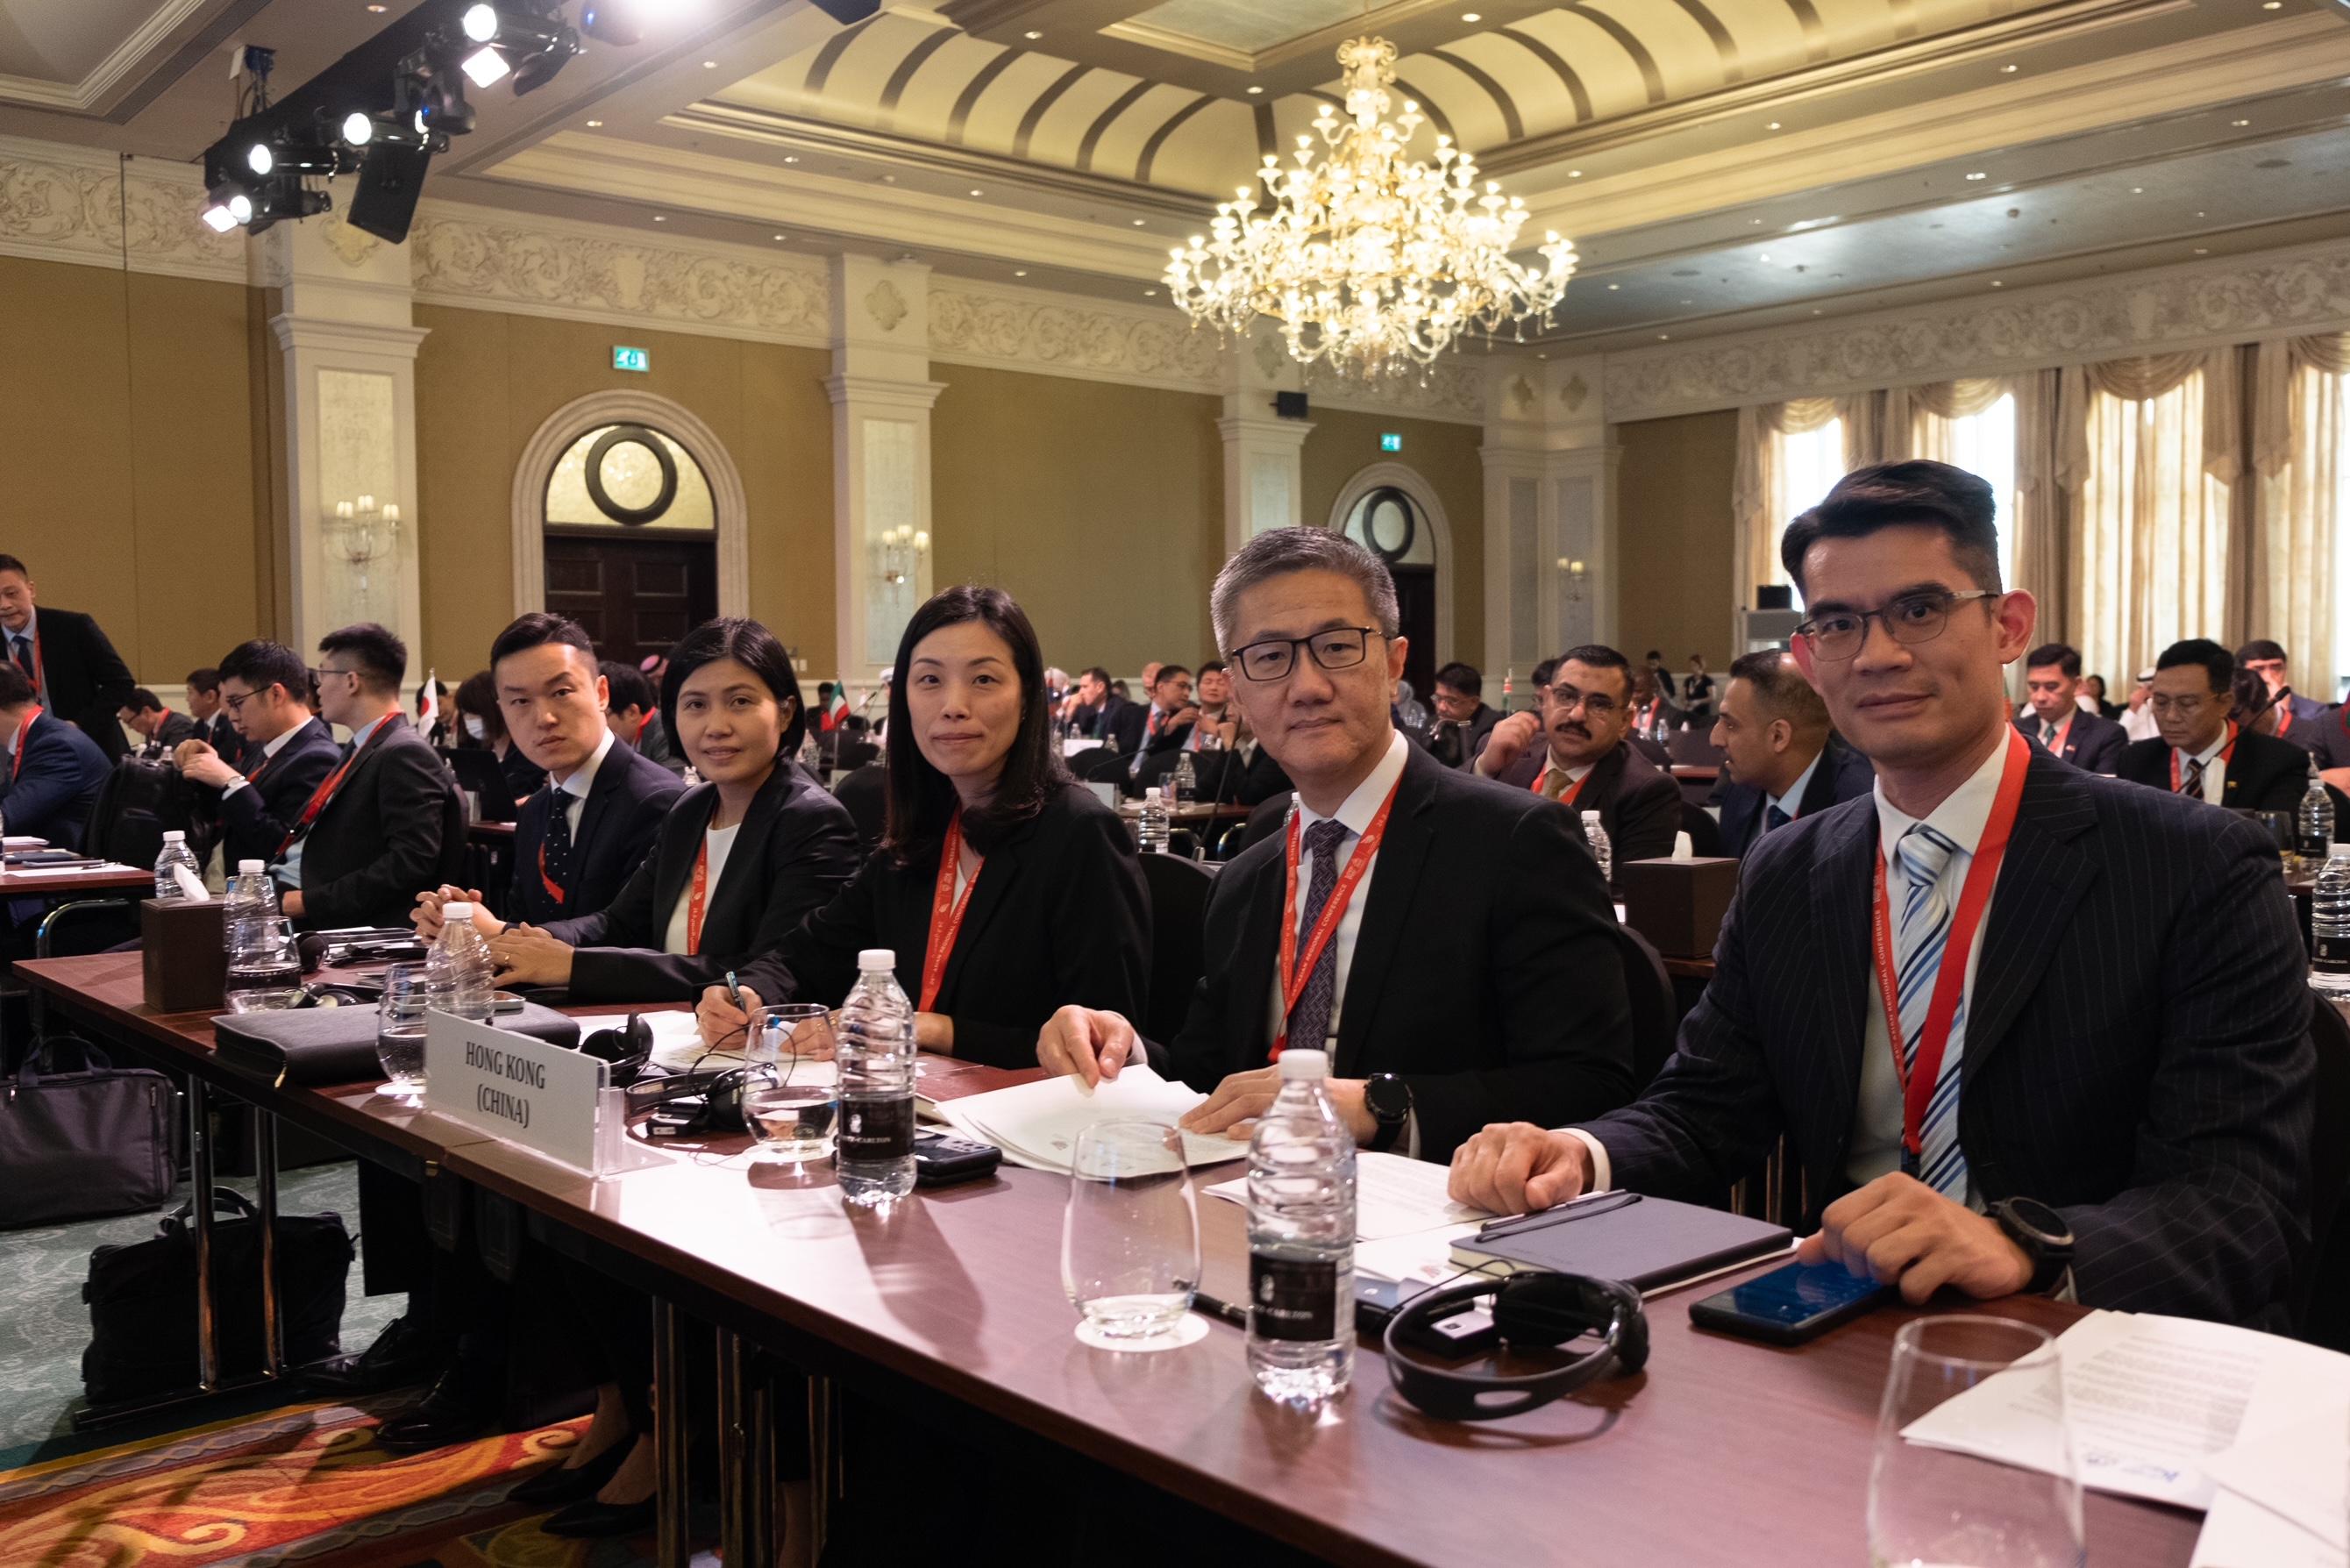 The Commissioner of Police, Mr Siu Chak-yee (second right), led a delegation to attend the 24th INTERPOL Asian Regional Conference in Abu Dhabi, United Arab Emirates, from February 7 to 9.